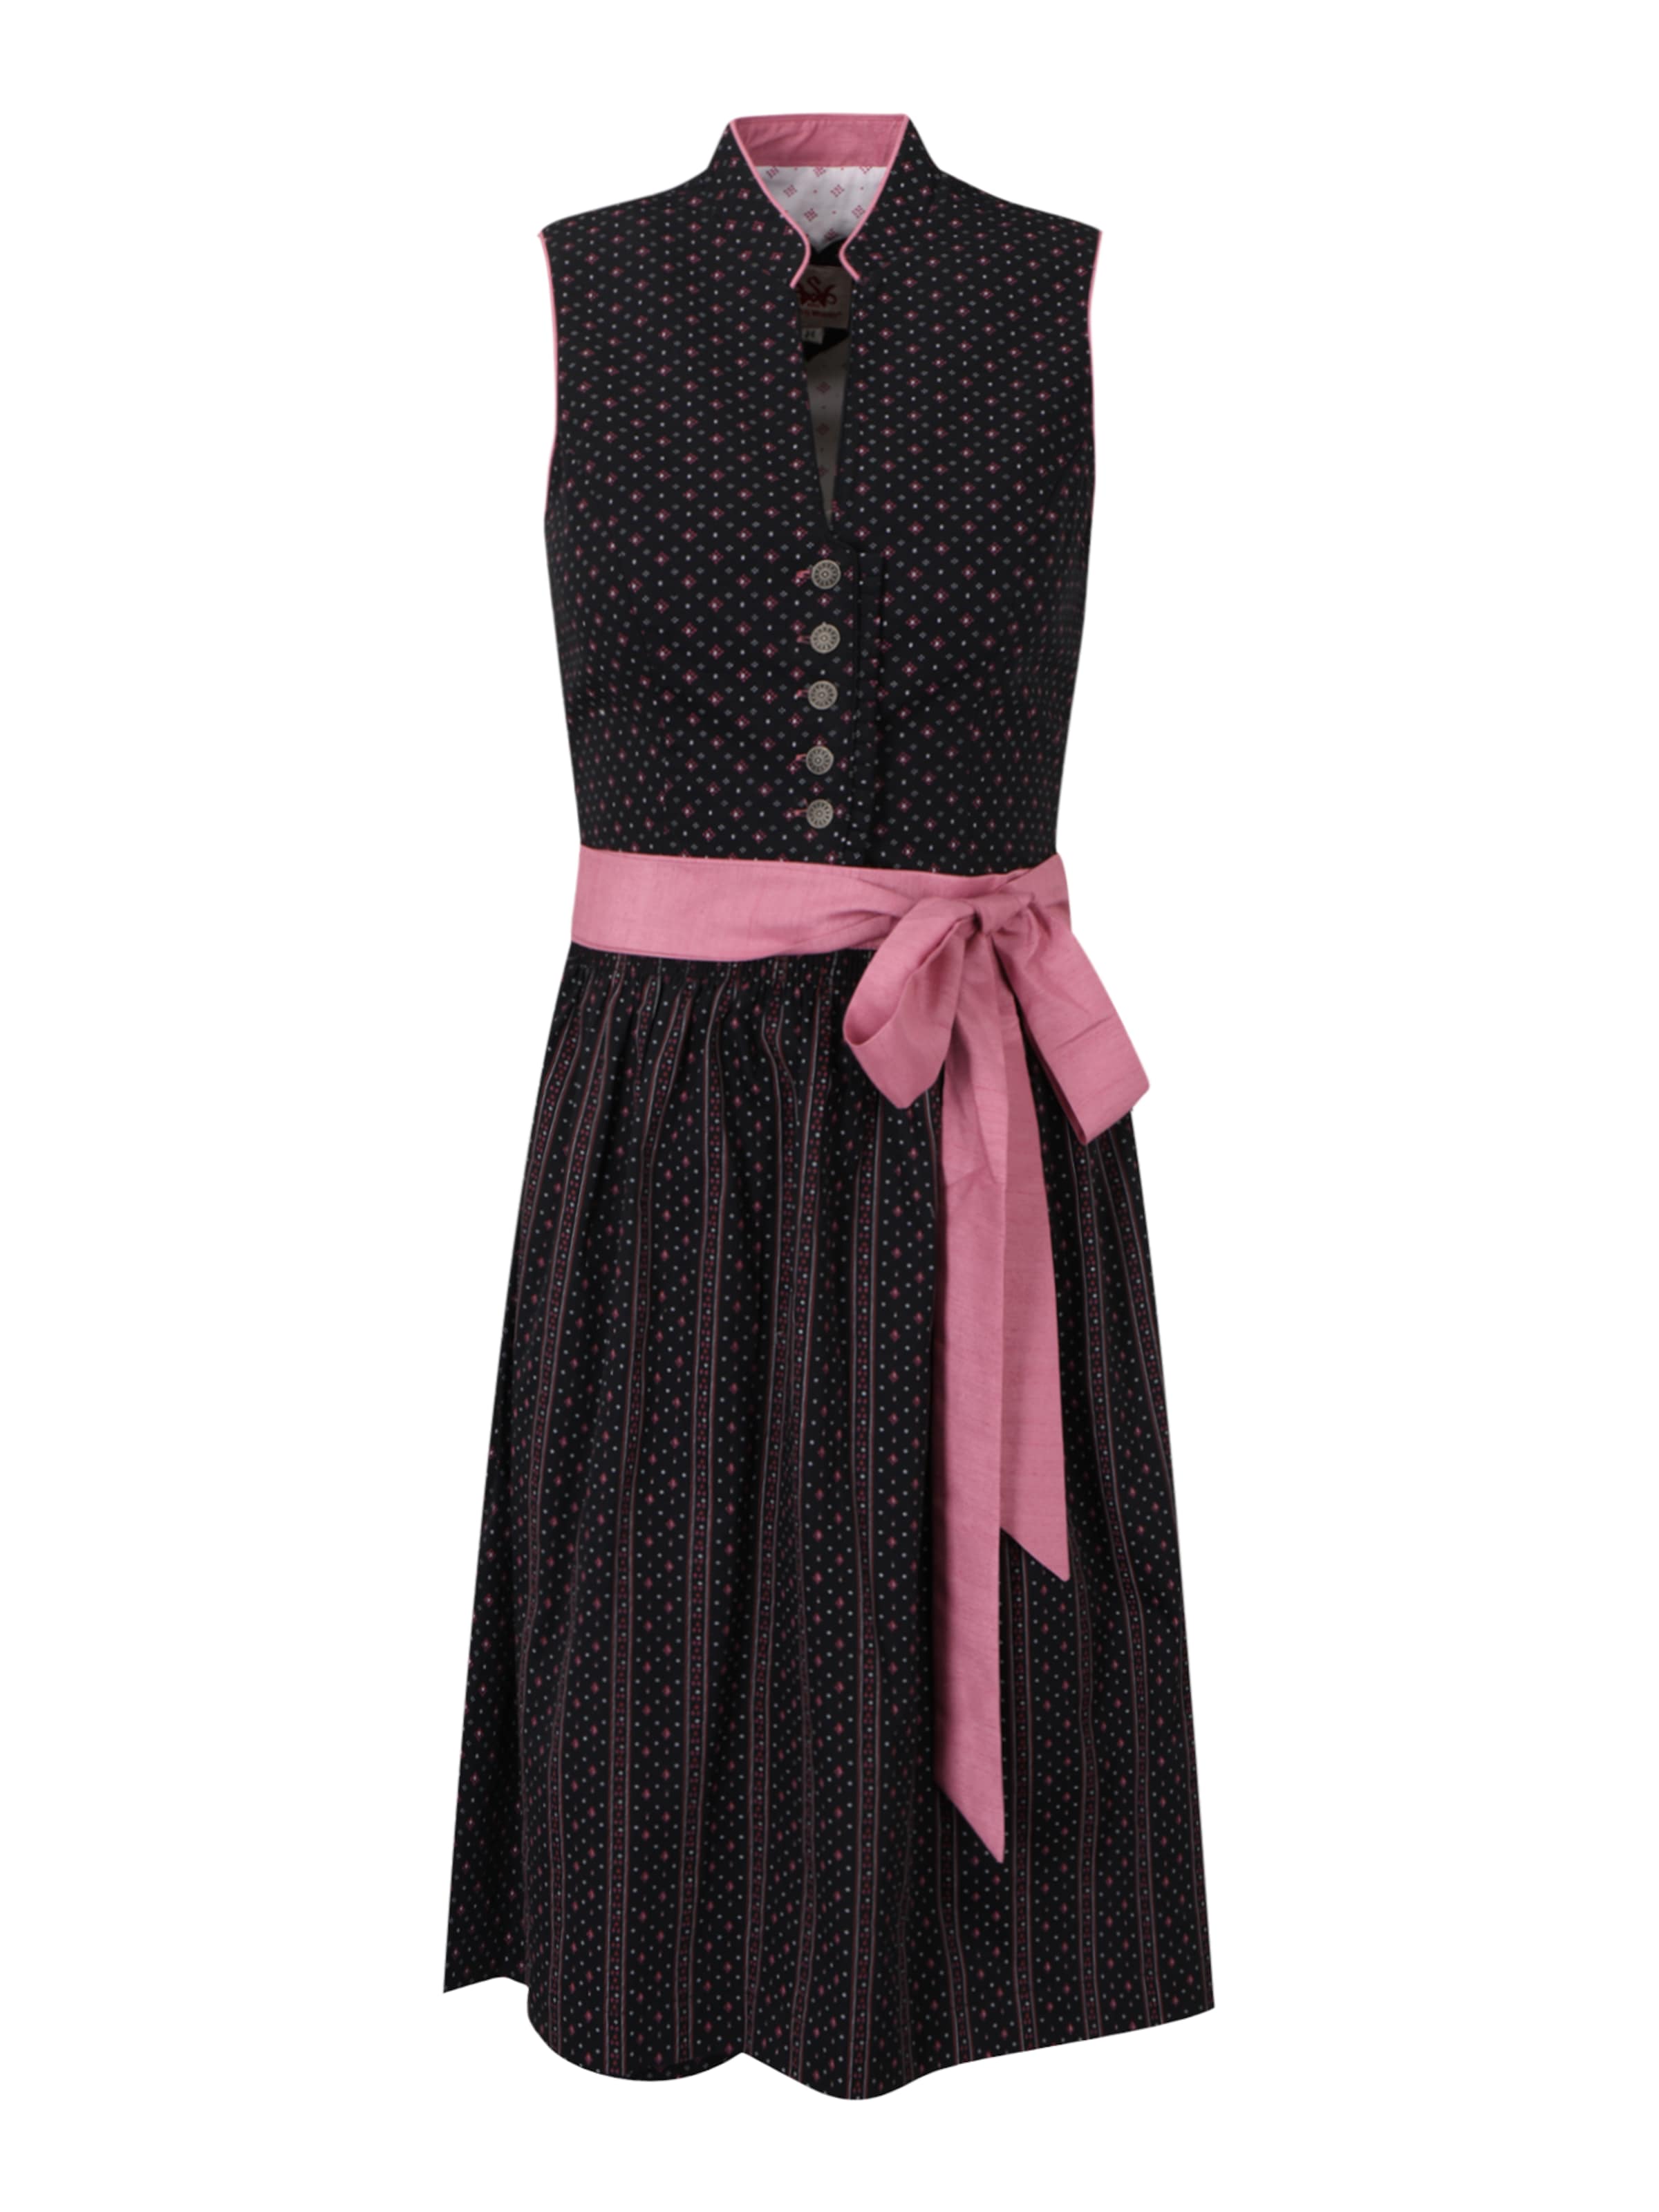 Spieth & Wensky Dirndl mixed pattern classic style Fashion Traditional Dresses Dirndl 